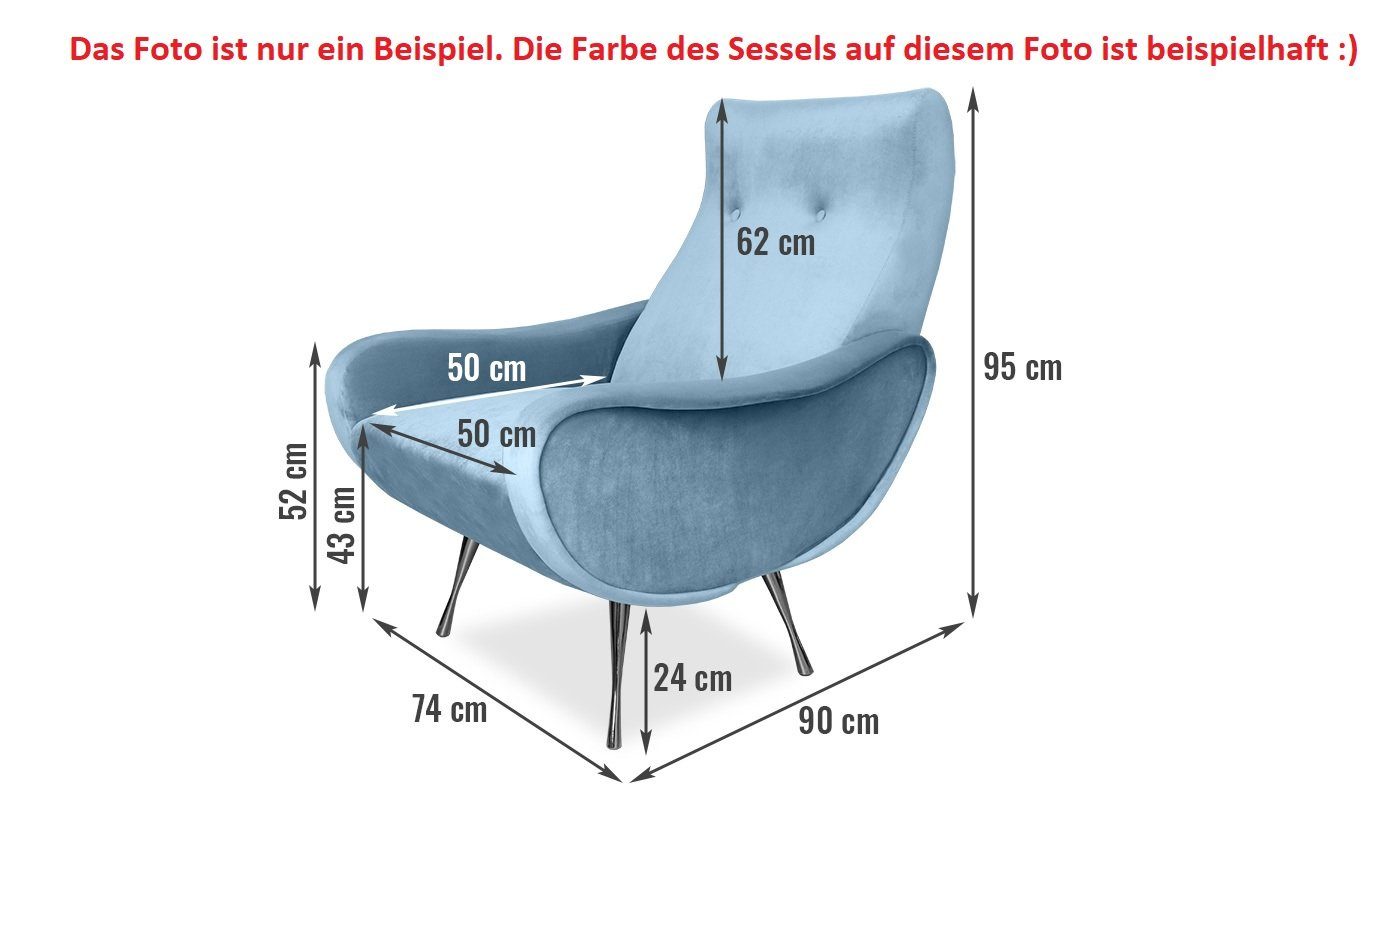 Couchsessel, Sessel, ROYAL Hellbraun Relaxsessel, pressiode Fernsehsessel, Lesesessel TV-Sessel